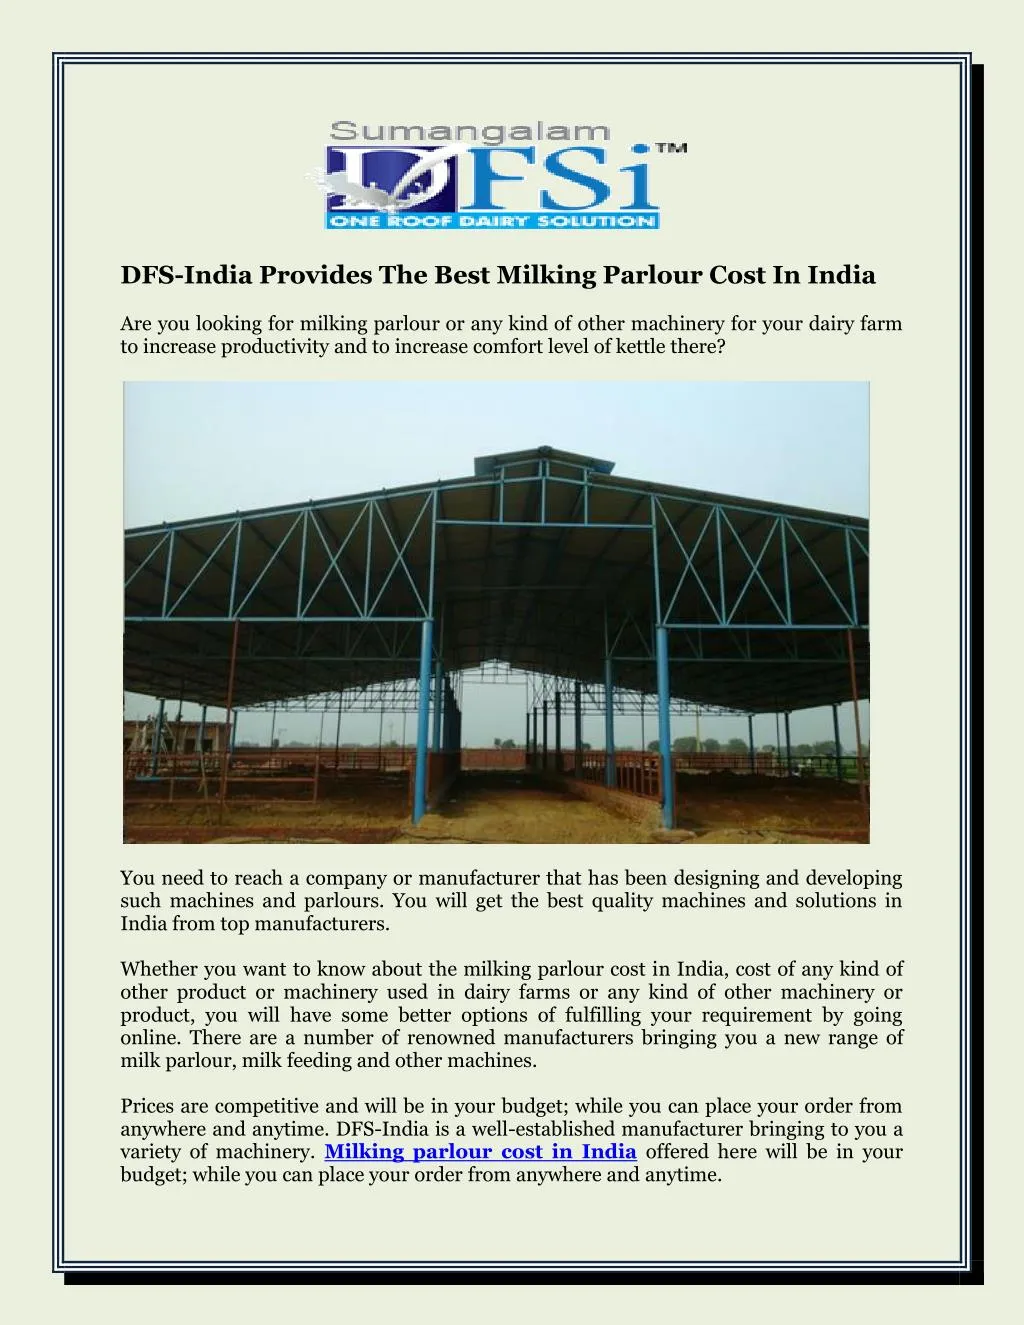 dfs india provides the best milking parlour cost